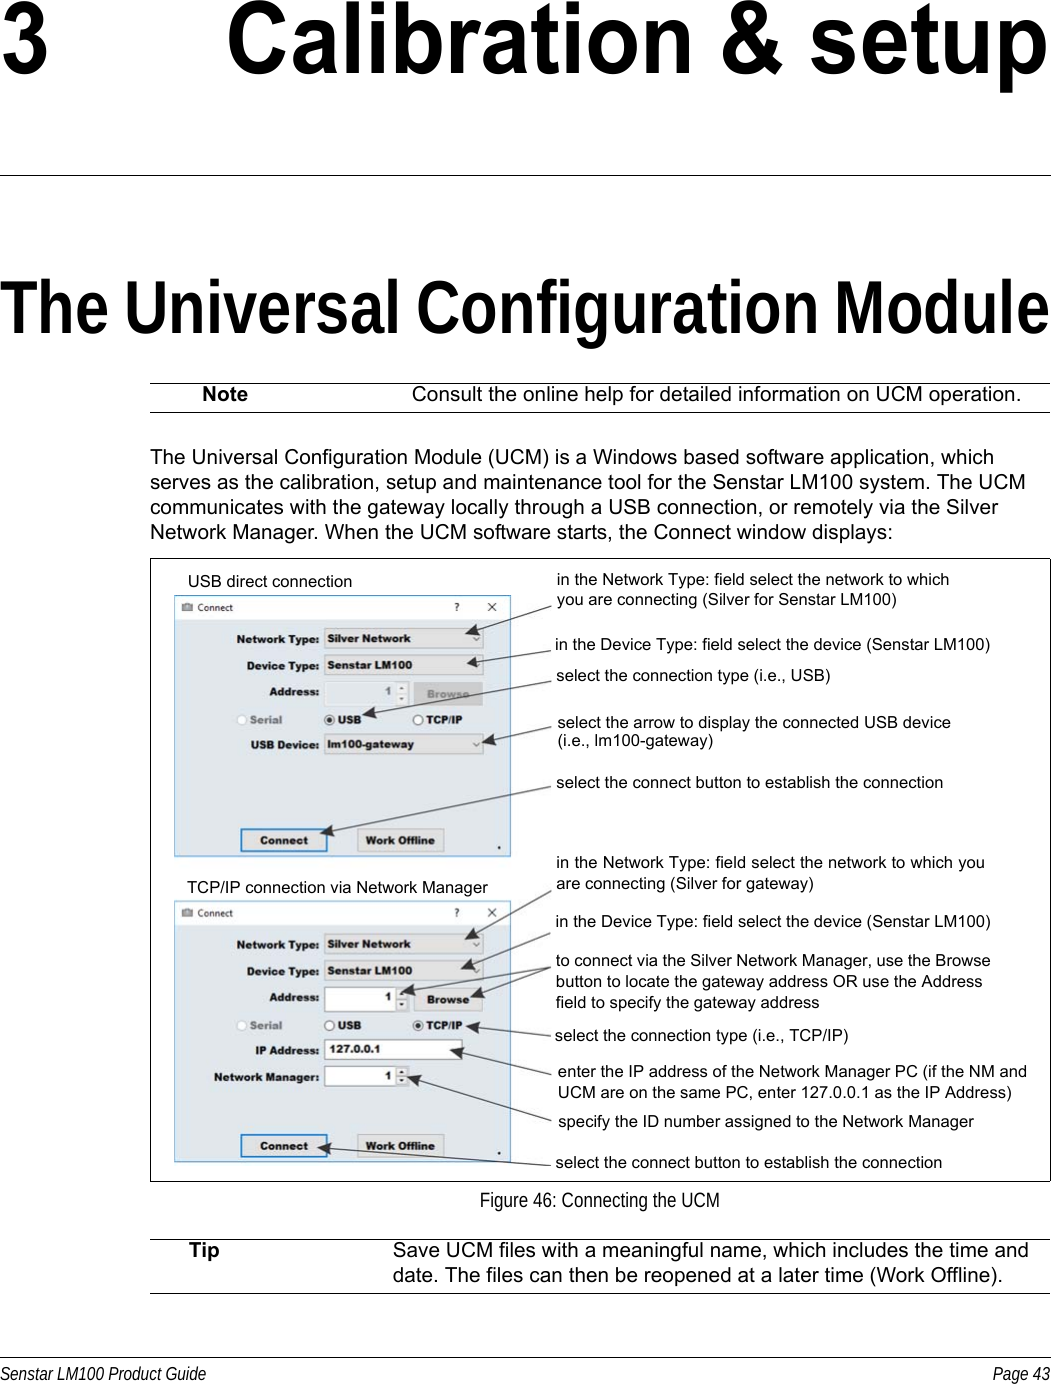 Senstar LM100 Product Guide Page 433 Calibration &amp; setupThe Universal Configuration ModuleThe Universal Configuration Module (UCM) is a Windows based software application, which serves as the calibration, setup and maintenance tool for the Senstar LM100 system. The UCM communicates with the gateway locally through a USB connection, or remotely via the Silver Network Manager. When the UCM software starts, the Connect window displays:  Note Consult the online help for detailed information on UCM operation.Figure 46: Connecting the UCMTip Save UCM files with a meaningful name, which includes the time and date. The files can then be reopened at a later time (Work Offline). USB direct connectionTCP/IP connection via Network Managerin the Network Type: field select the network to which you are connecting (Silver for Senstar LM100)in the Device Type: field select the device (Senstar LM100)select the connection type (i.e., USB)select the connect button to establish the connectionin the Network Type: field select the network to which youare connecting (Silver for gateway)to connect via the Silver Network Manager, use the Browse button to locate the gateway address OR use the Address field to specify the gateway addressselect the connection type (i.e., TCP/IP)enter the IP address of the Network Manager PC (if the NM and UCM are on the same PC, enter 127.0.0.1 as the IP Address)specify the ID number assigned to the Network Managerselect the connect button to establish the connectionin the Device Type: field select the device (Senstar LM100)select the arrow to display the connected USB device(i.e., lm100-gateway)